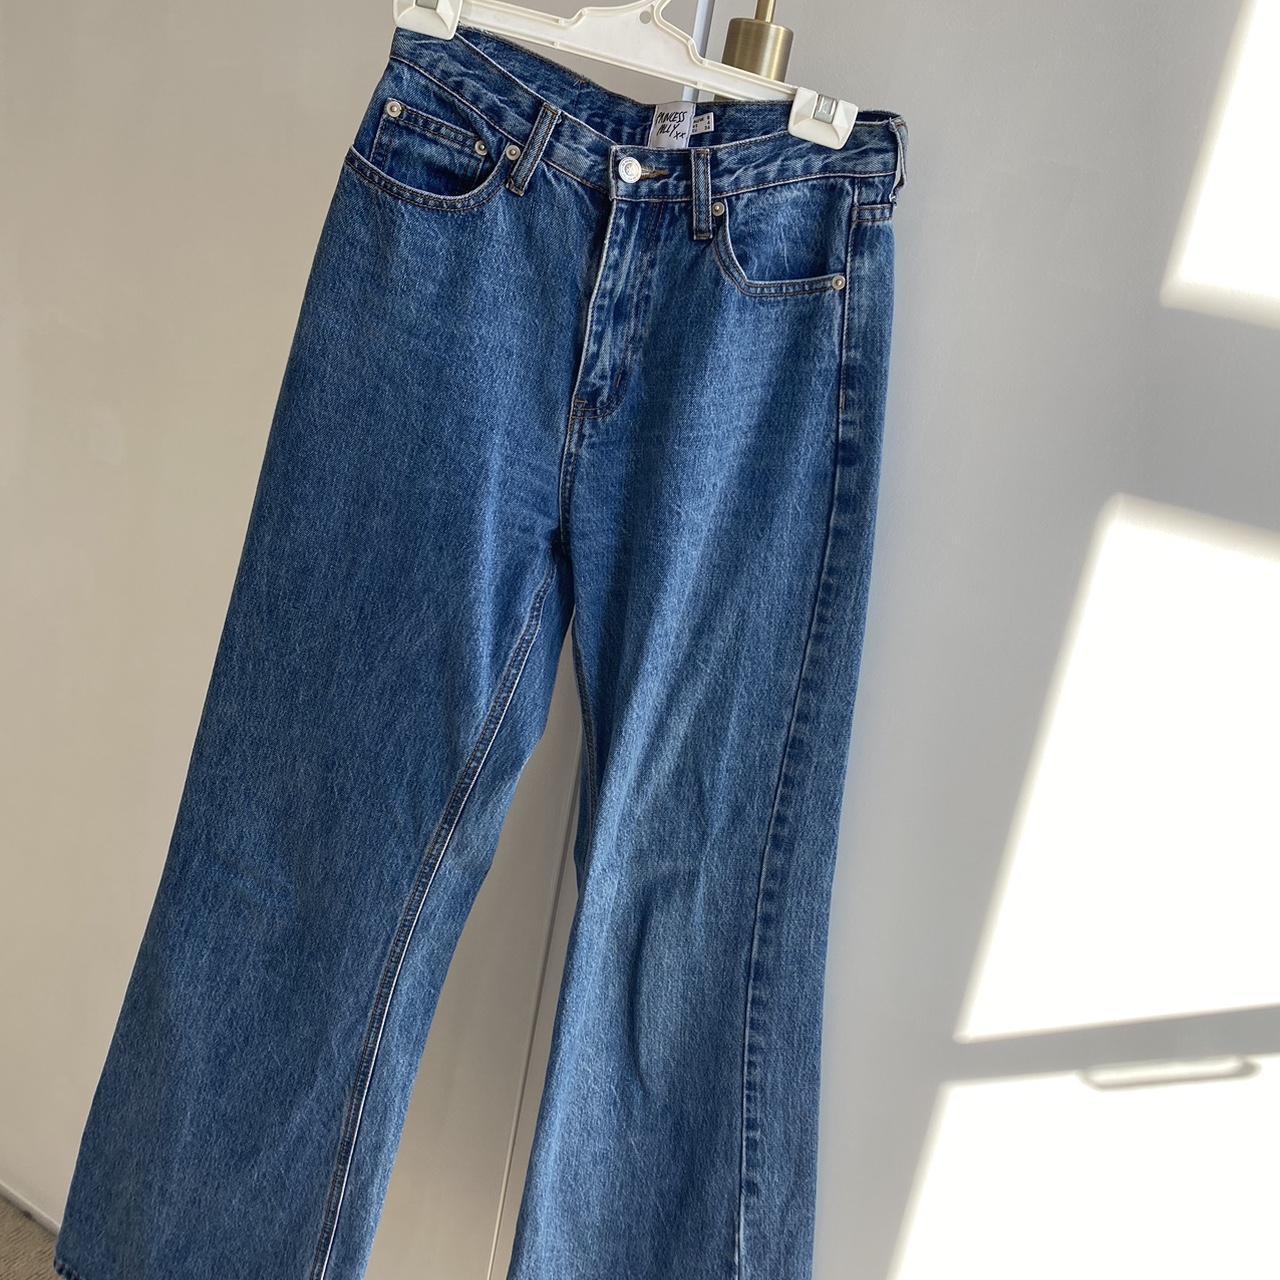 Princess polly wide leg jeans Adored these jeans... - Depop